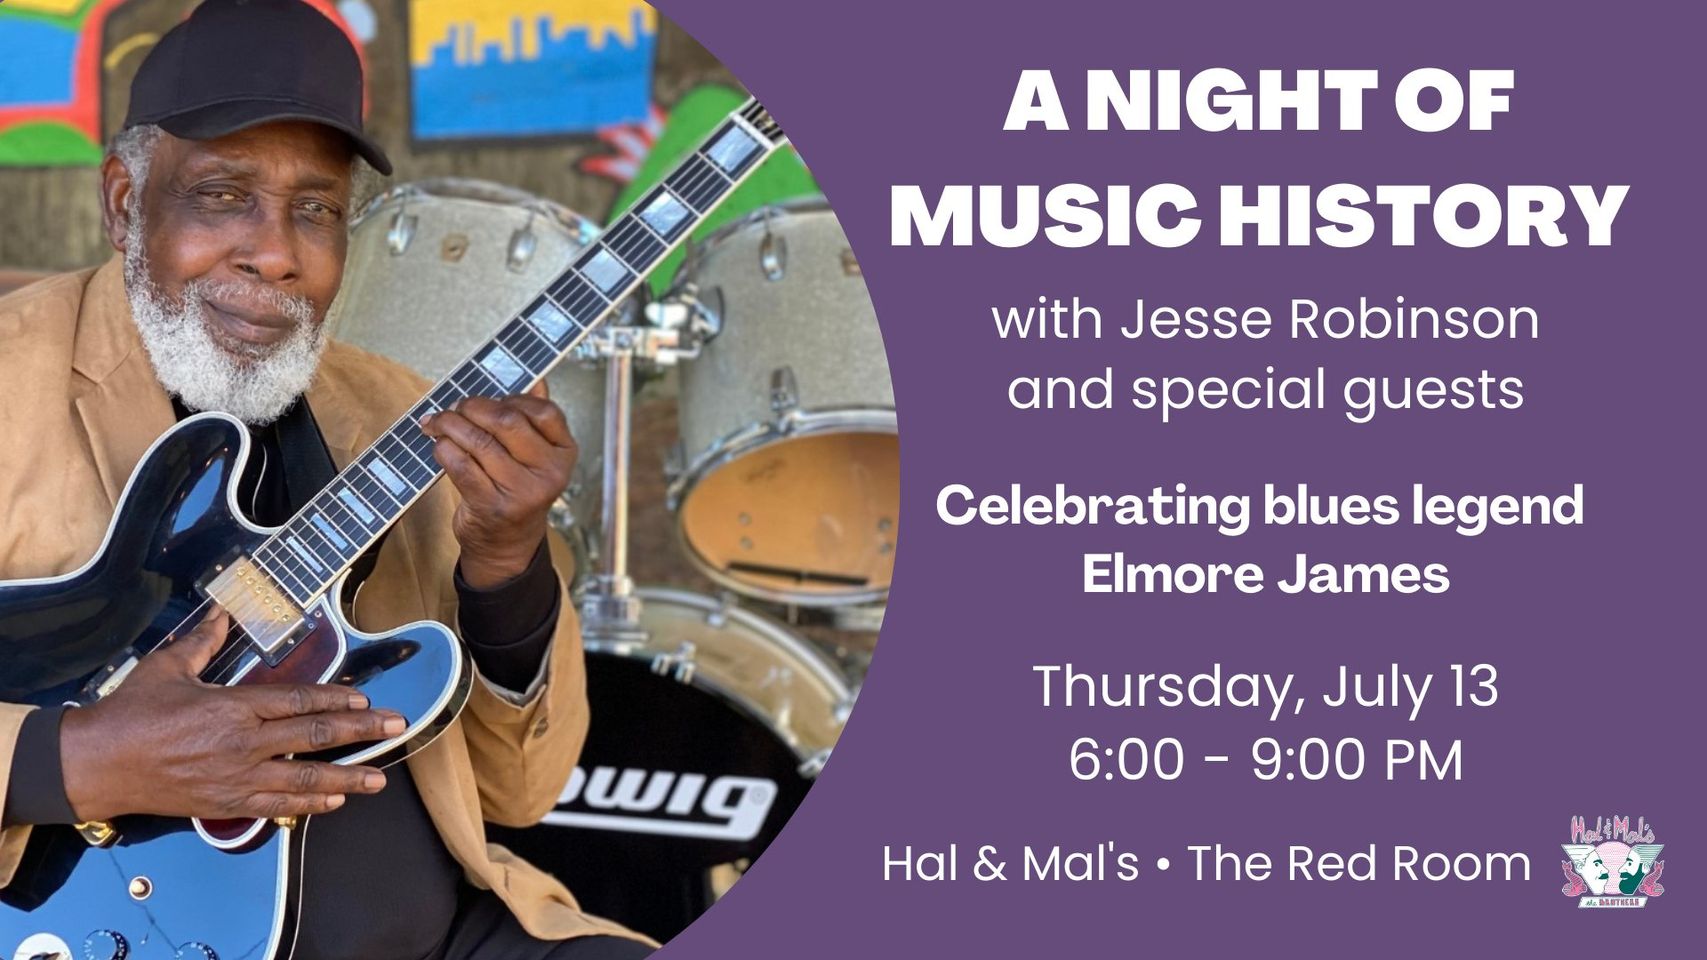 A Night of Music History with Jesse Robinson + Guests!